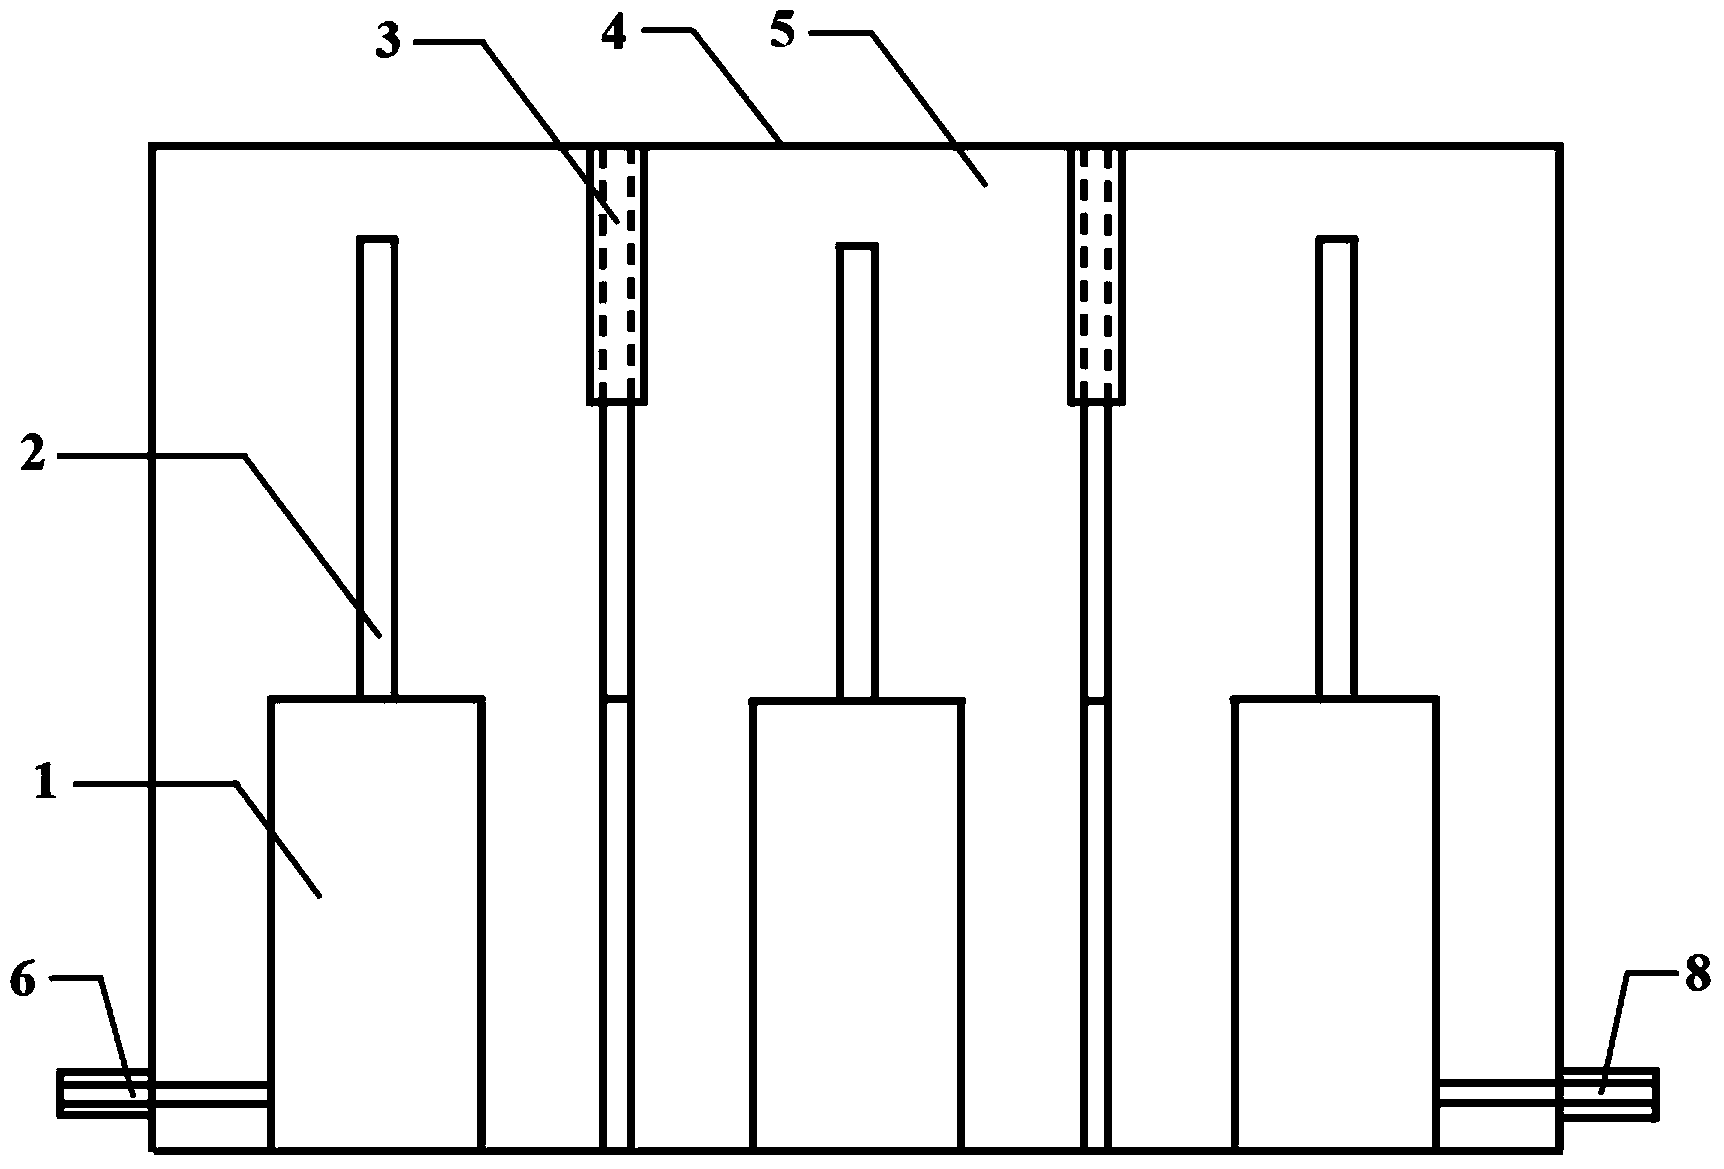 Coaxial cavity dual-band filter based on stepped impedance structure